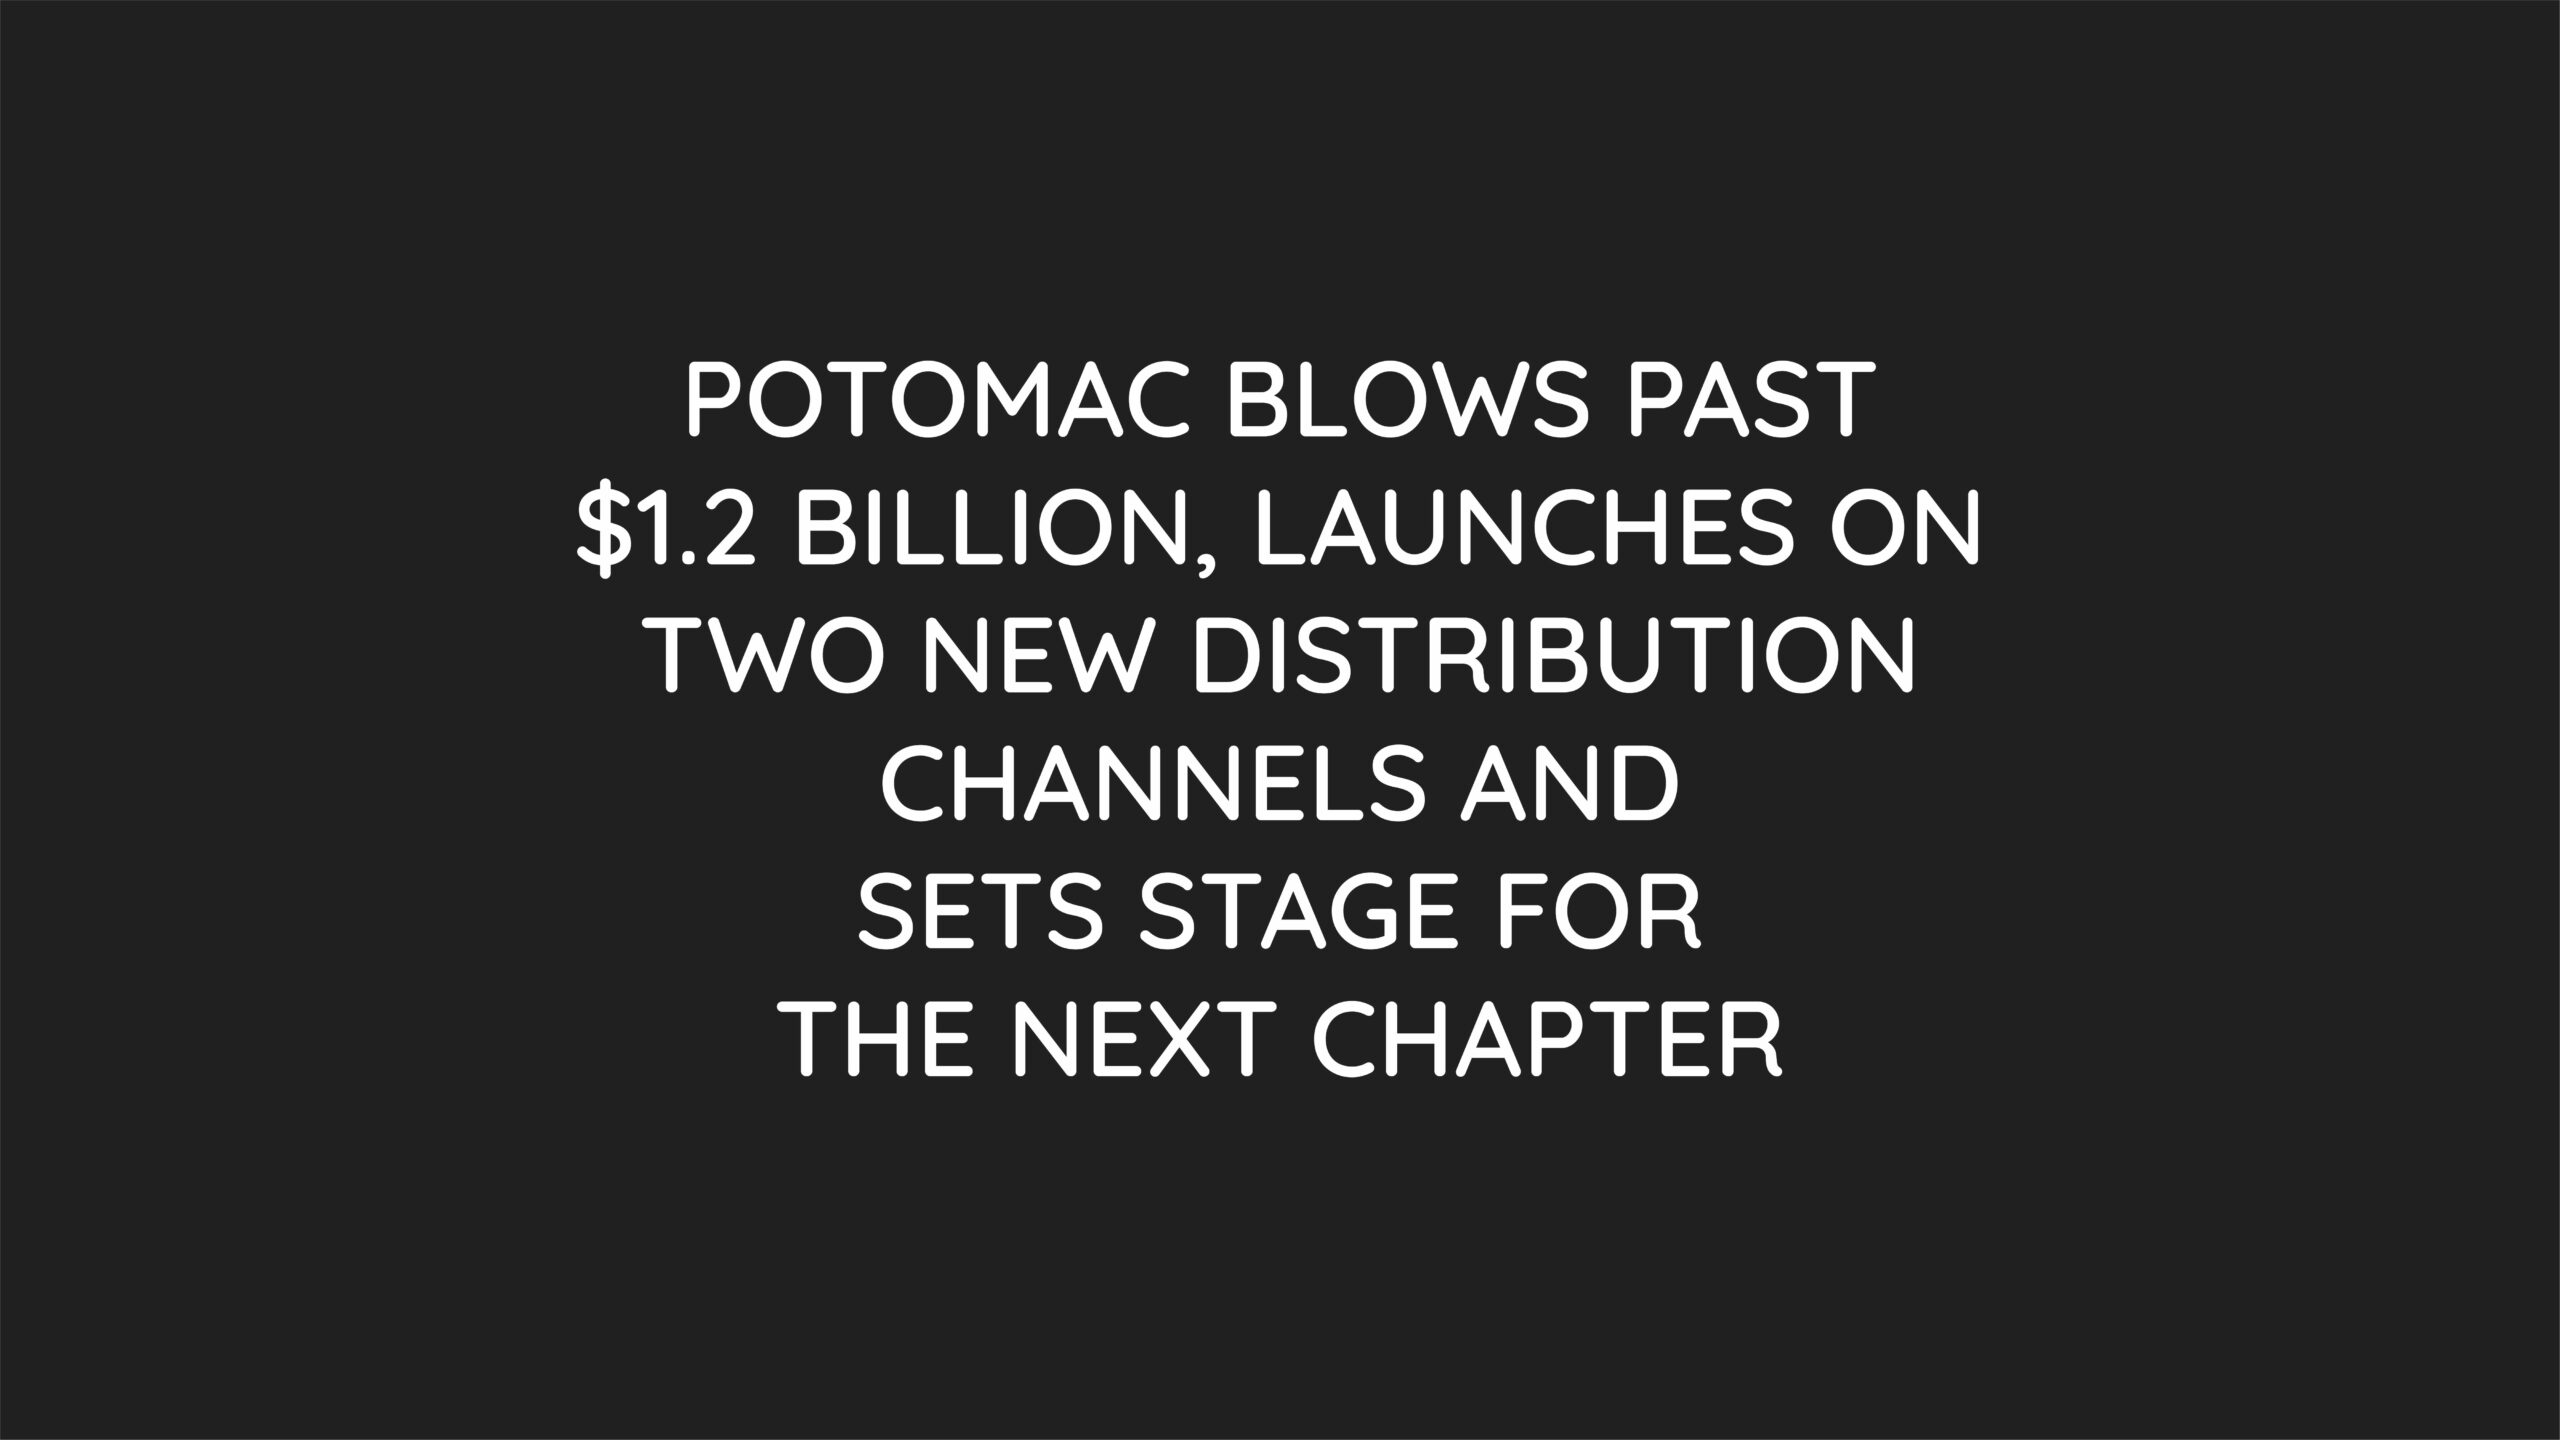 Press Release: Potomac Blows Past $1.2 Billion and Sets Stage for the Next Chapter